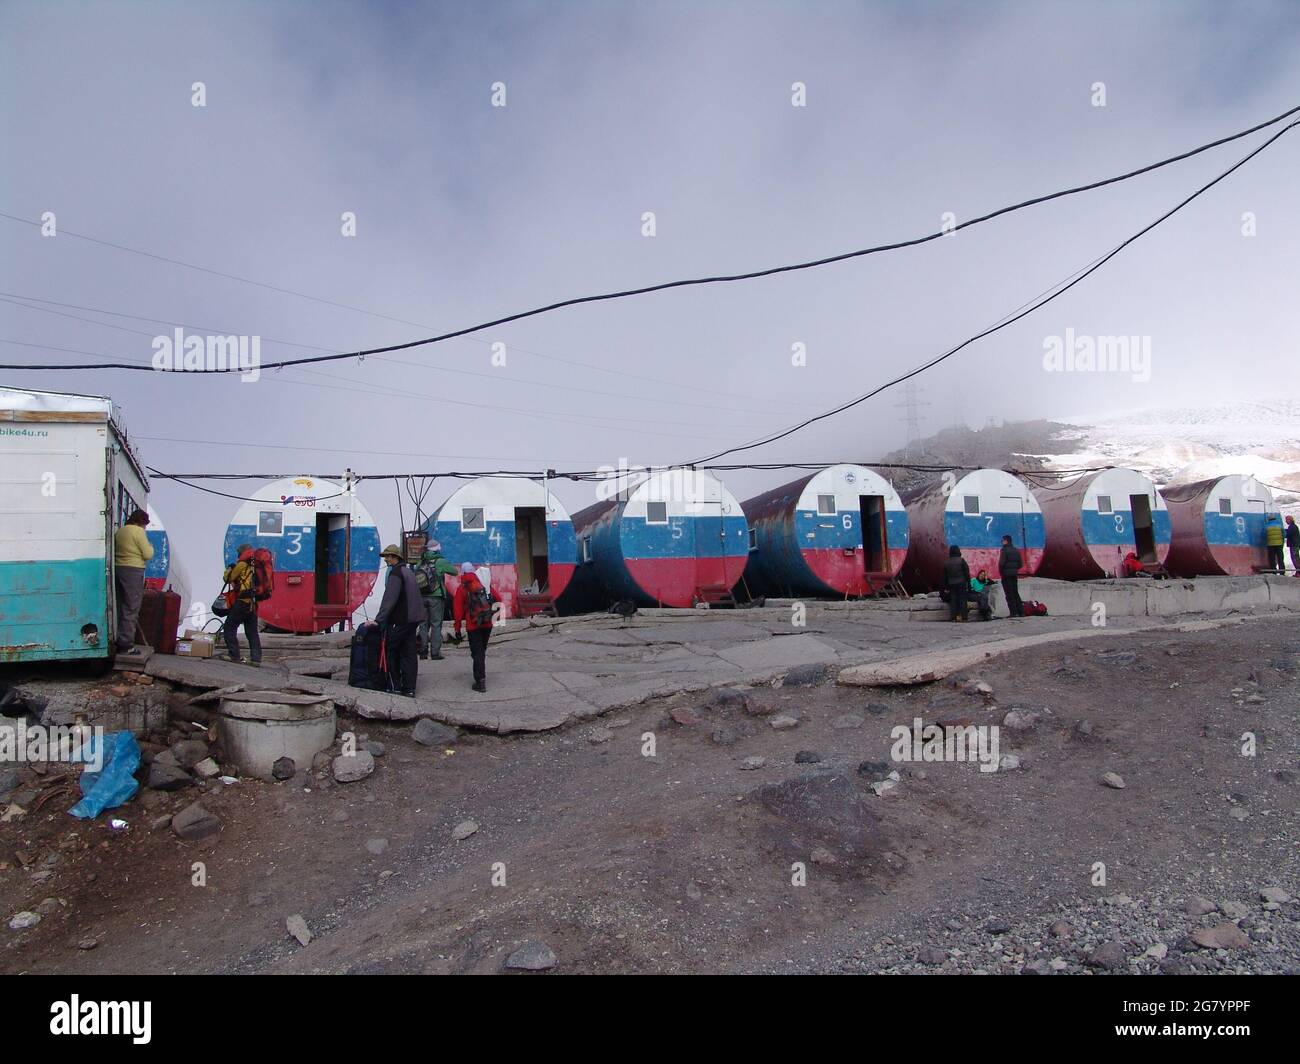 MINERALNYE VODY, RUSSIA - Aug 14, 2010: The Barrels- Camp is the most popular accommodation option for climbers on the slopes of Elbrus, on Garabashi Stock Photo